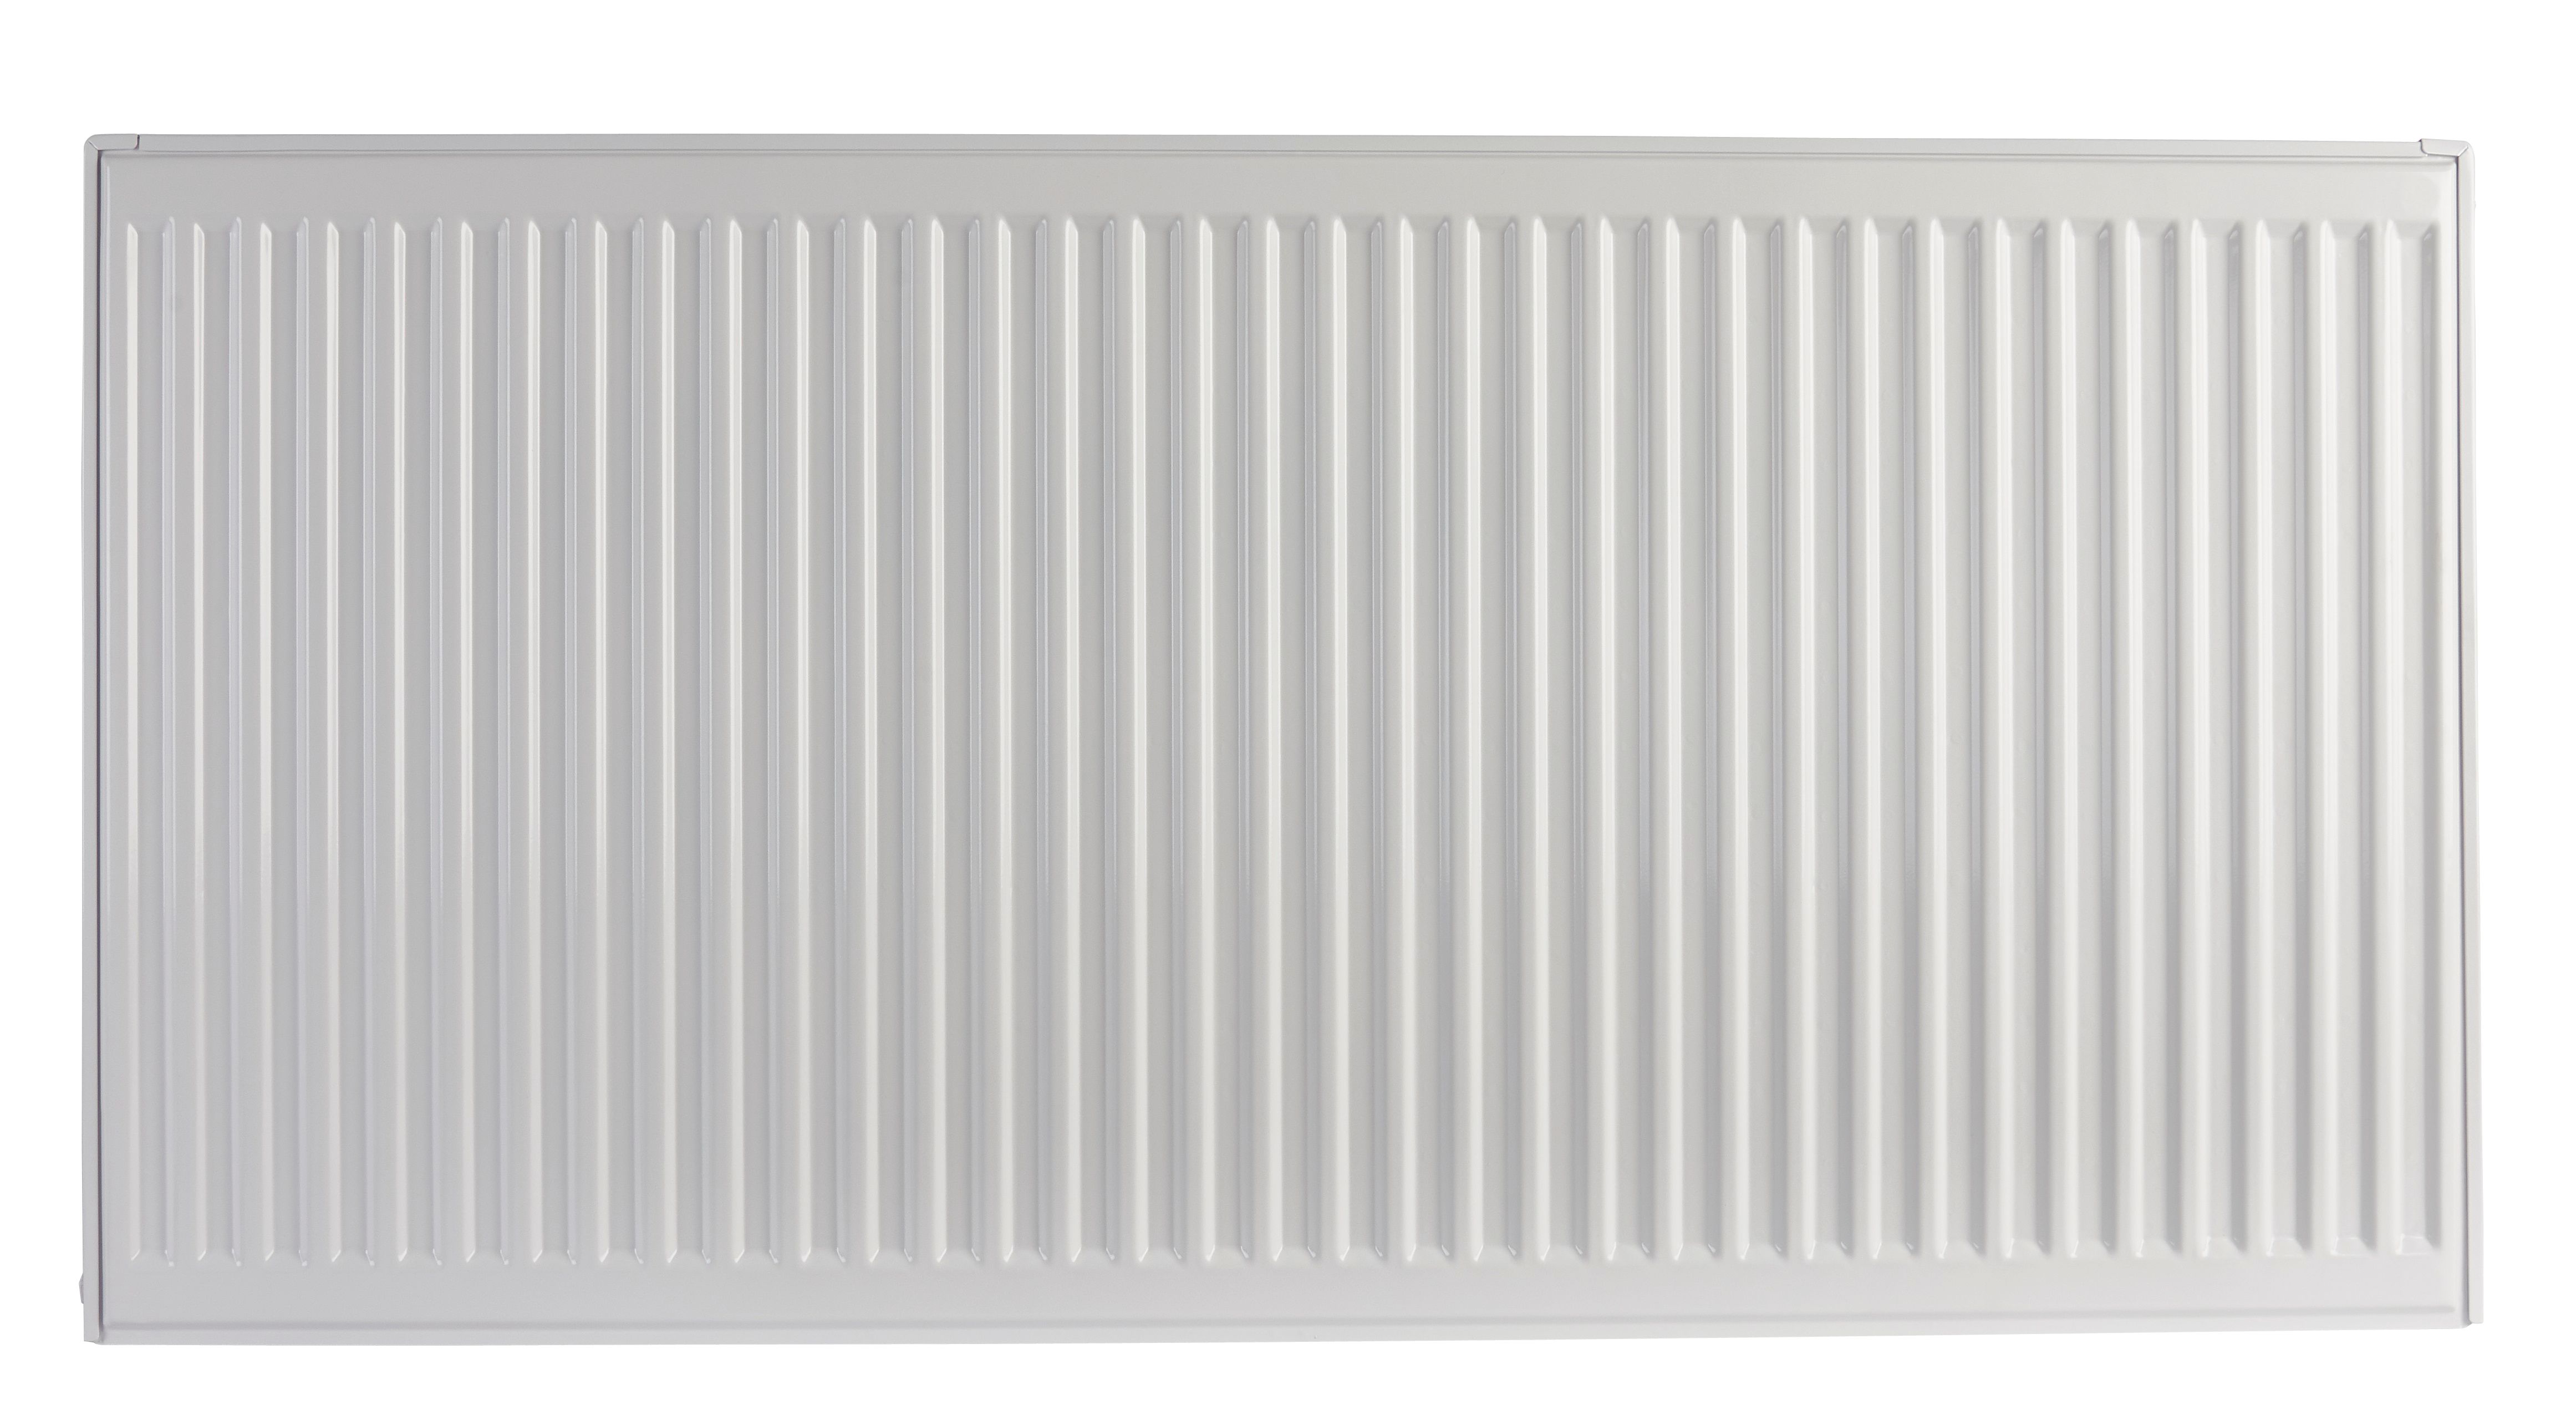 Image of Homeline by Stelrad 500 x 1200mm Type 11 Single Panel Single Convector Radiator